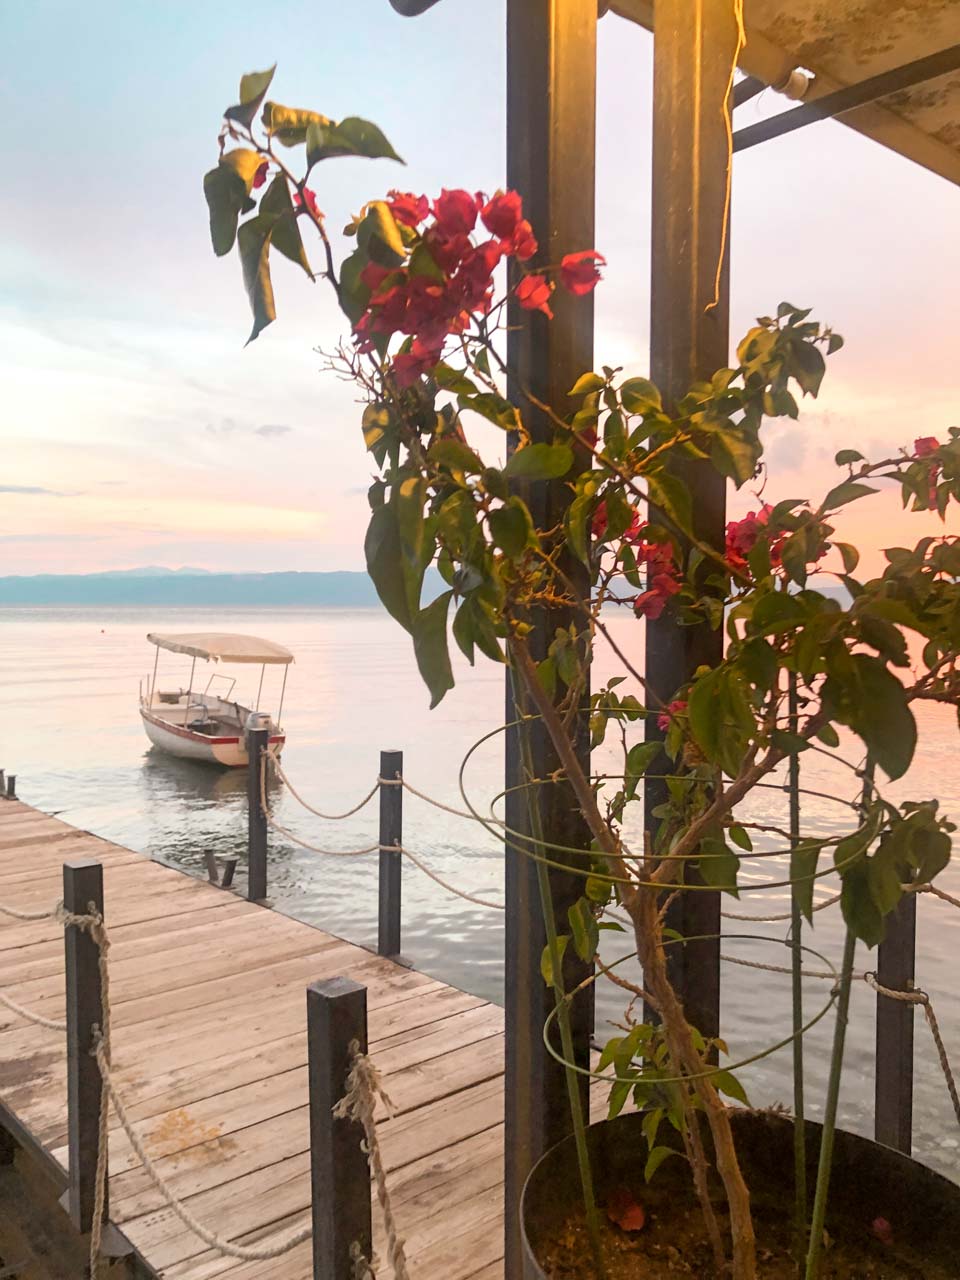 A branch with pink flowers and a boardwalk on the terrace of the Kaneo restaurant in Ohrid, North Macedonia